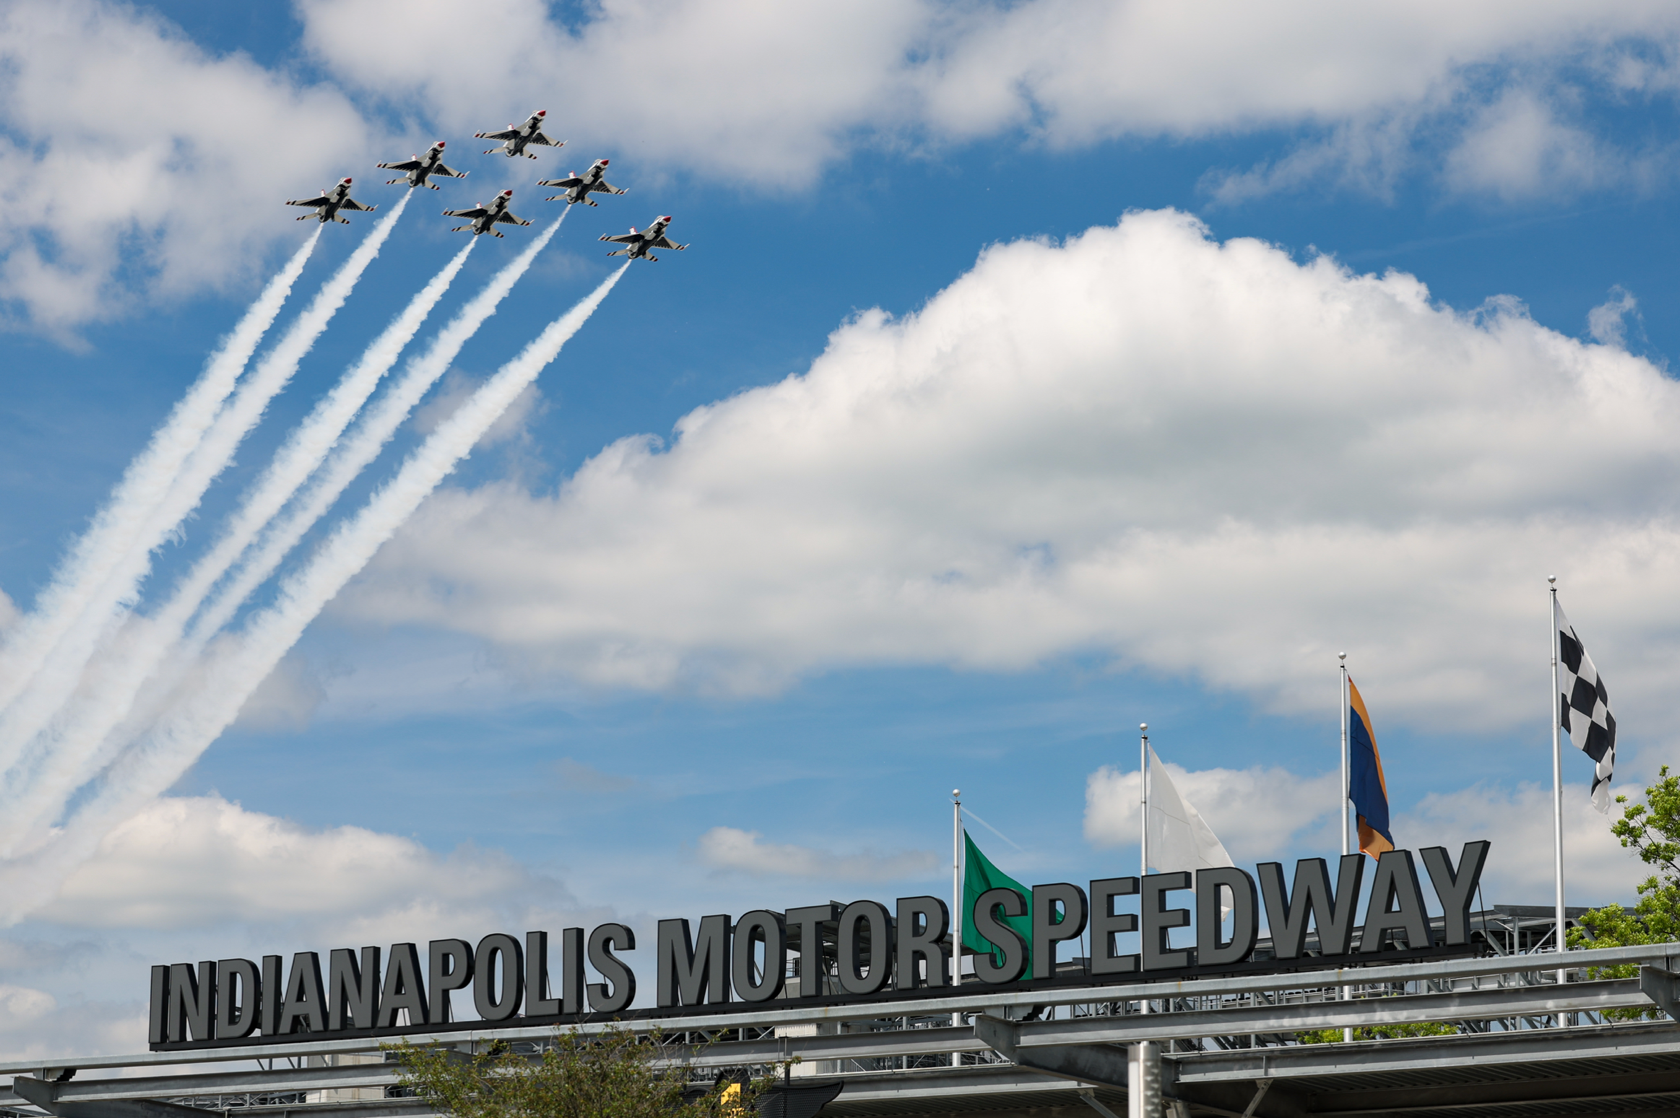 World's largest single-day sporting event: world record in Speedway, Indiana